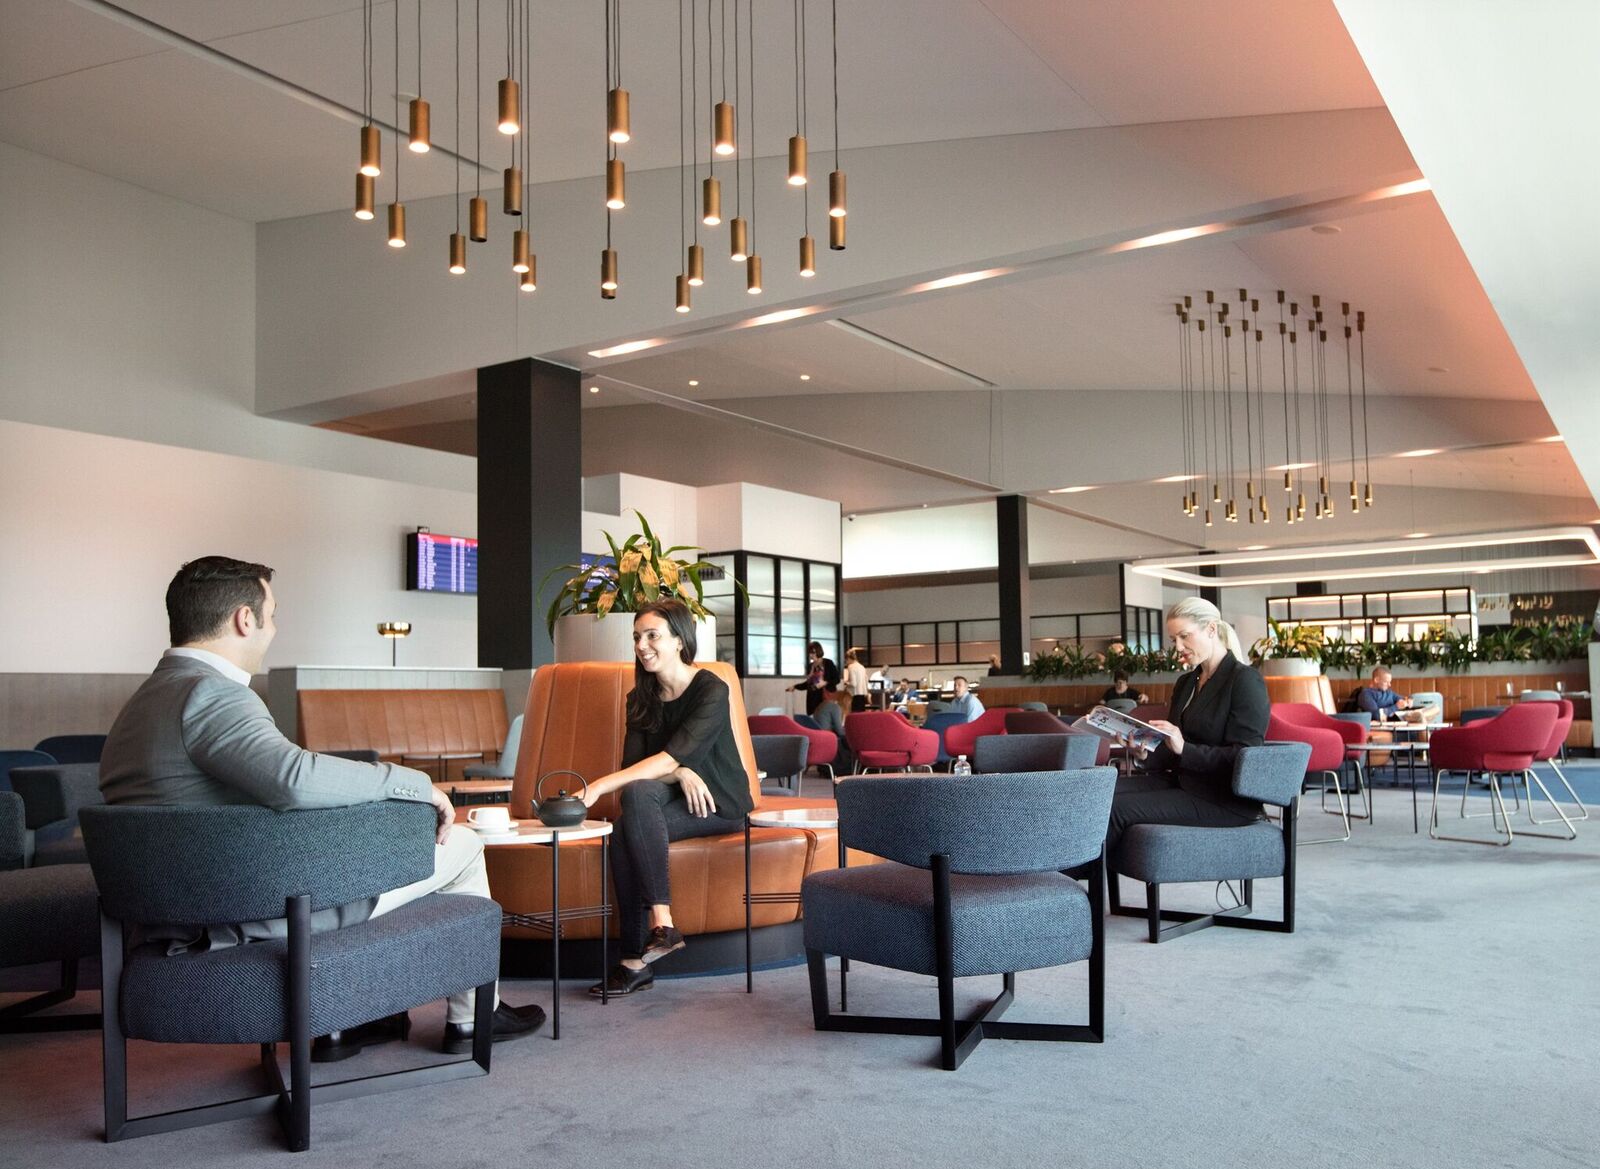 More signs of aviation life as Qantas plans lounge reopenings - Airline